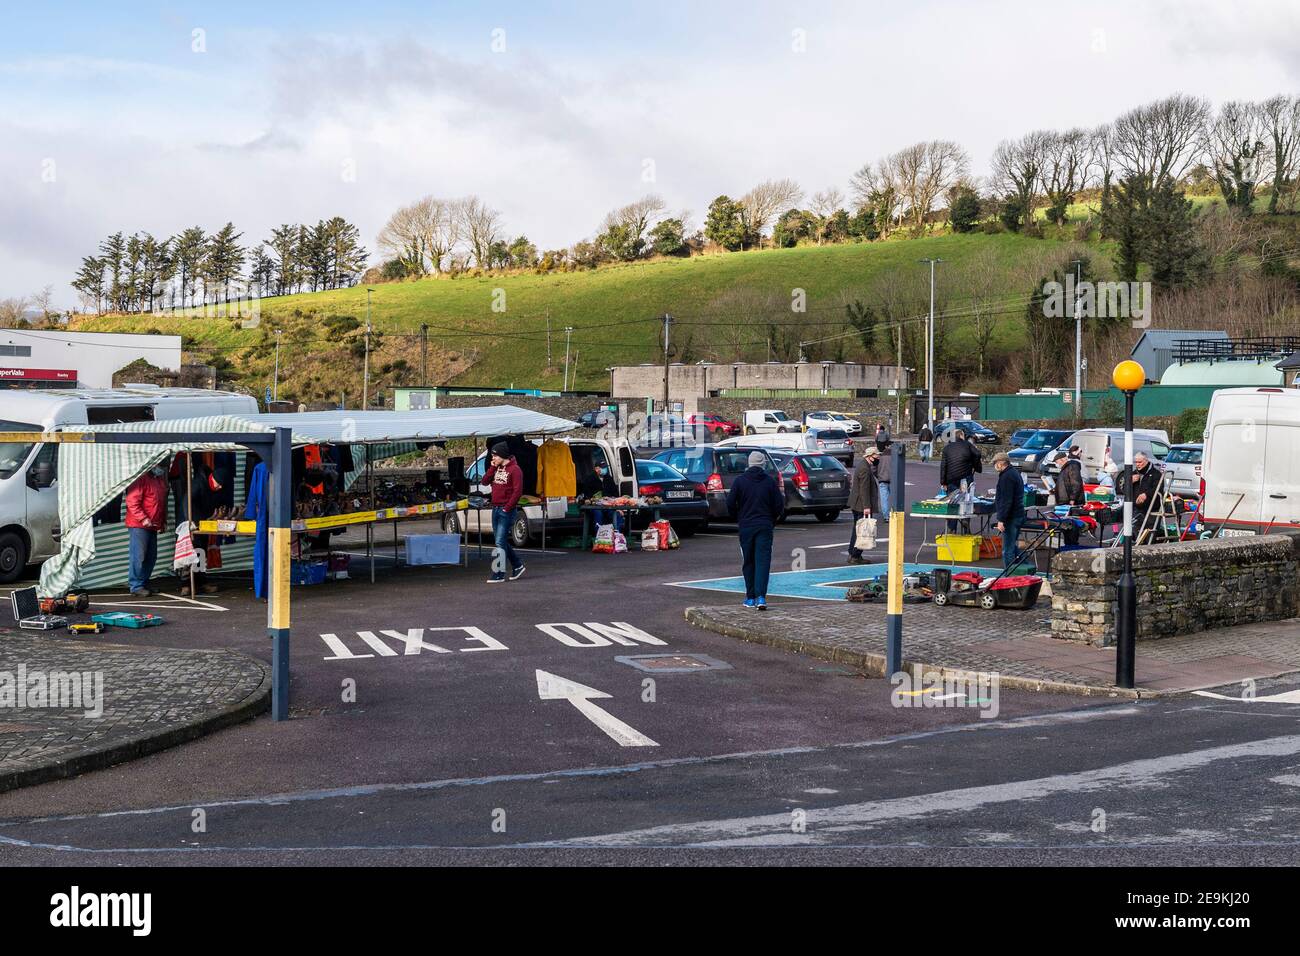 Bantry, West Cork, Ireland. 5th Feb, 2021. Despite level 5 lockdown restrictions, Bantry Friday Market was busy today with traders and customers alike. Although many people wore face masks, a good number didn't. There were a number of stalls trading selling non-essential goods. Credit: AG News/Alamy Live News Stock Photo